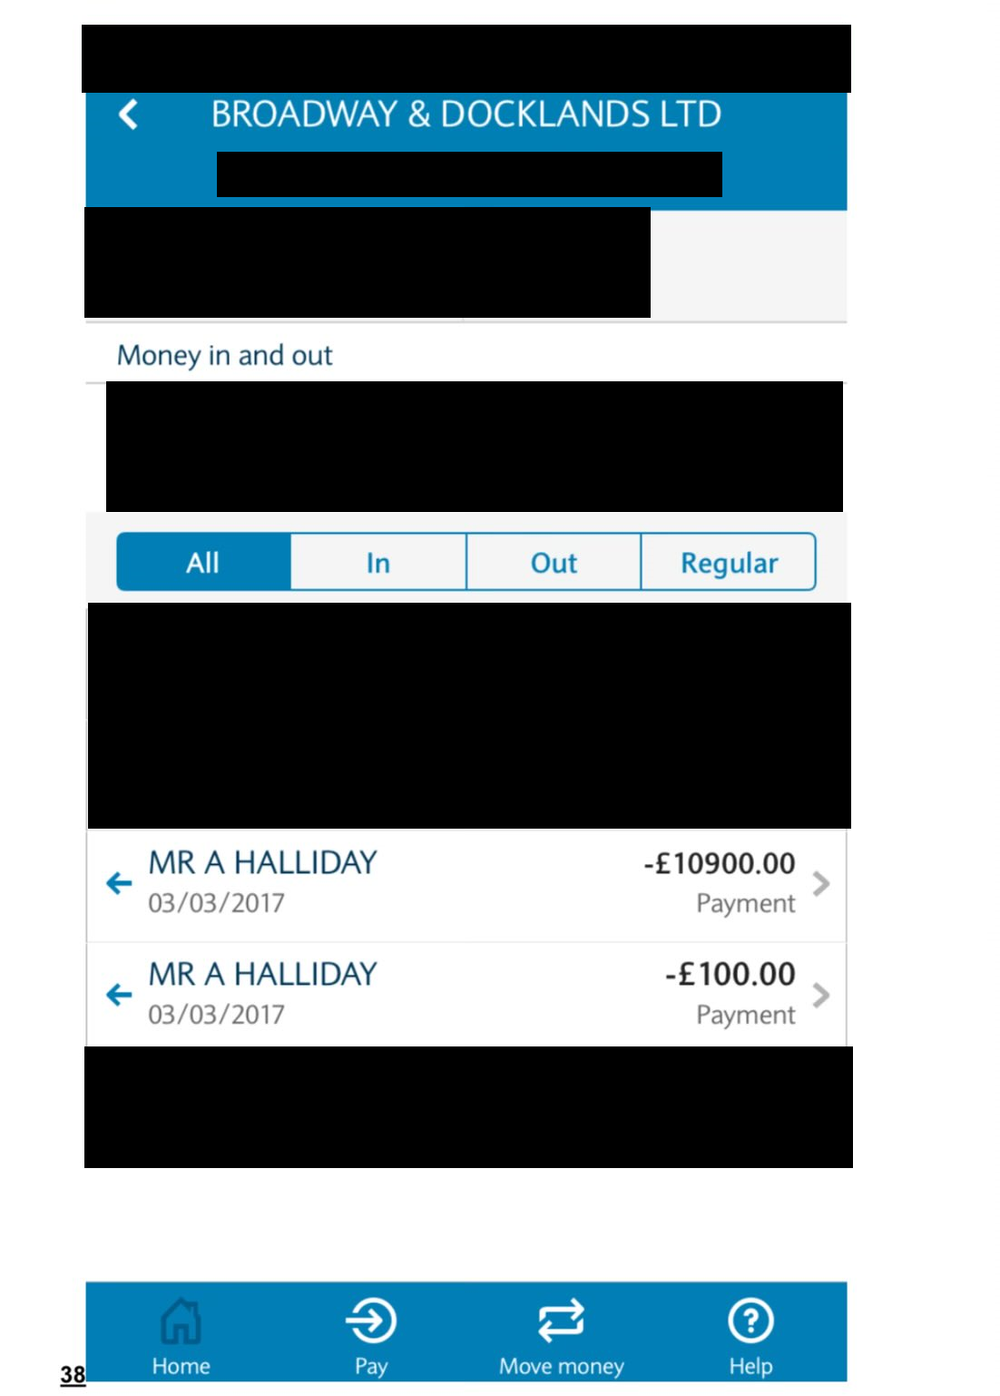 Bank statement showing money transferred to Anthony Halliday